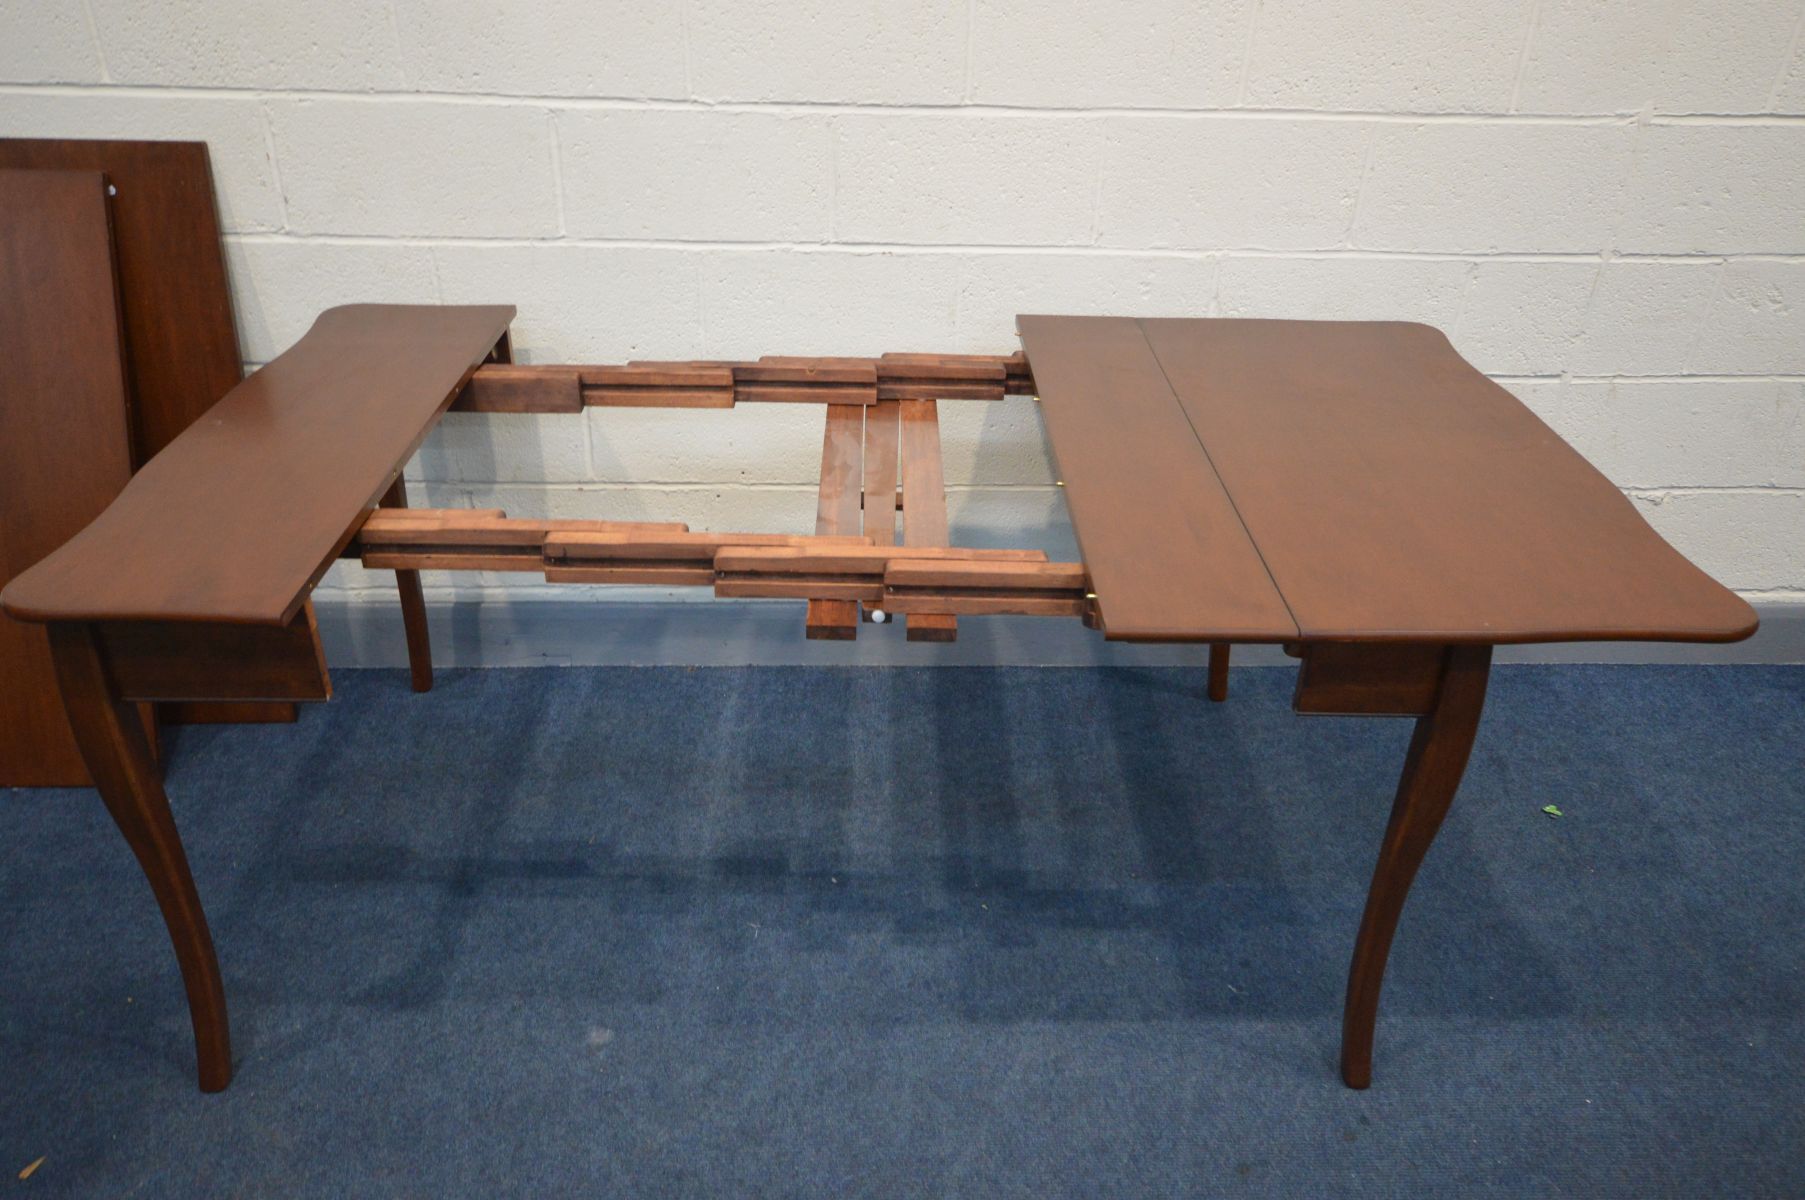 AN CHERRYWOOD EXTENDING DINING TABLE, that folds out from a tea table, with two additional leaves, - Image 2 of 3